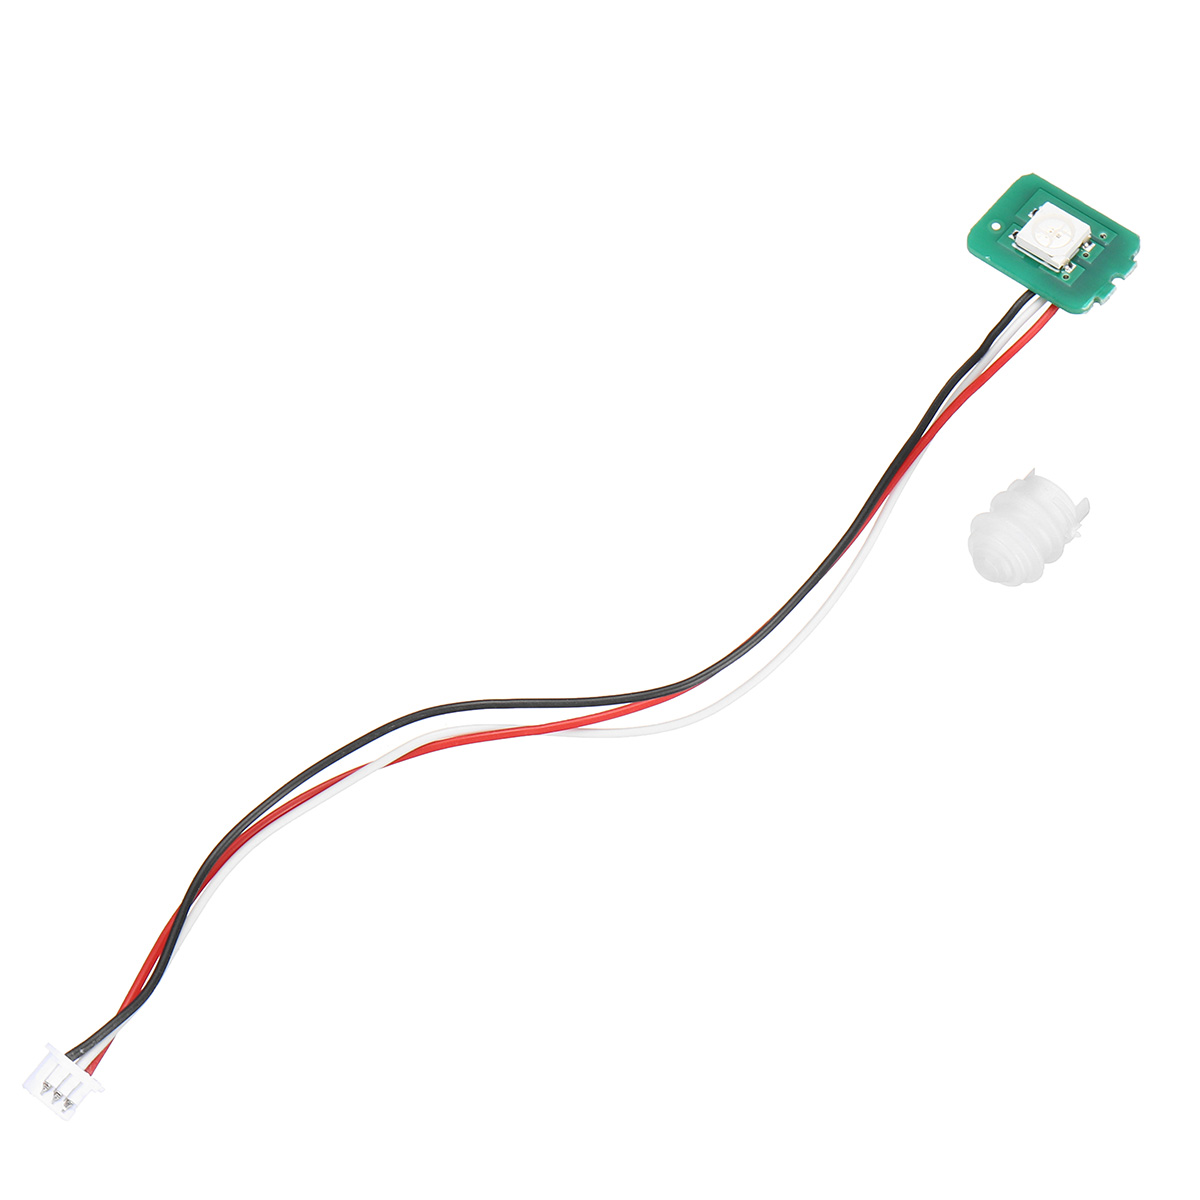 Eachine E200 Status light RC Helicopter Parts